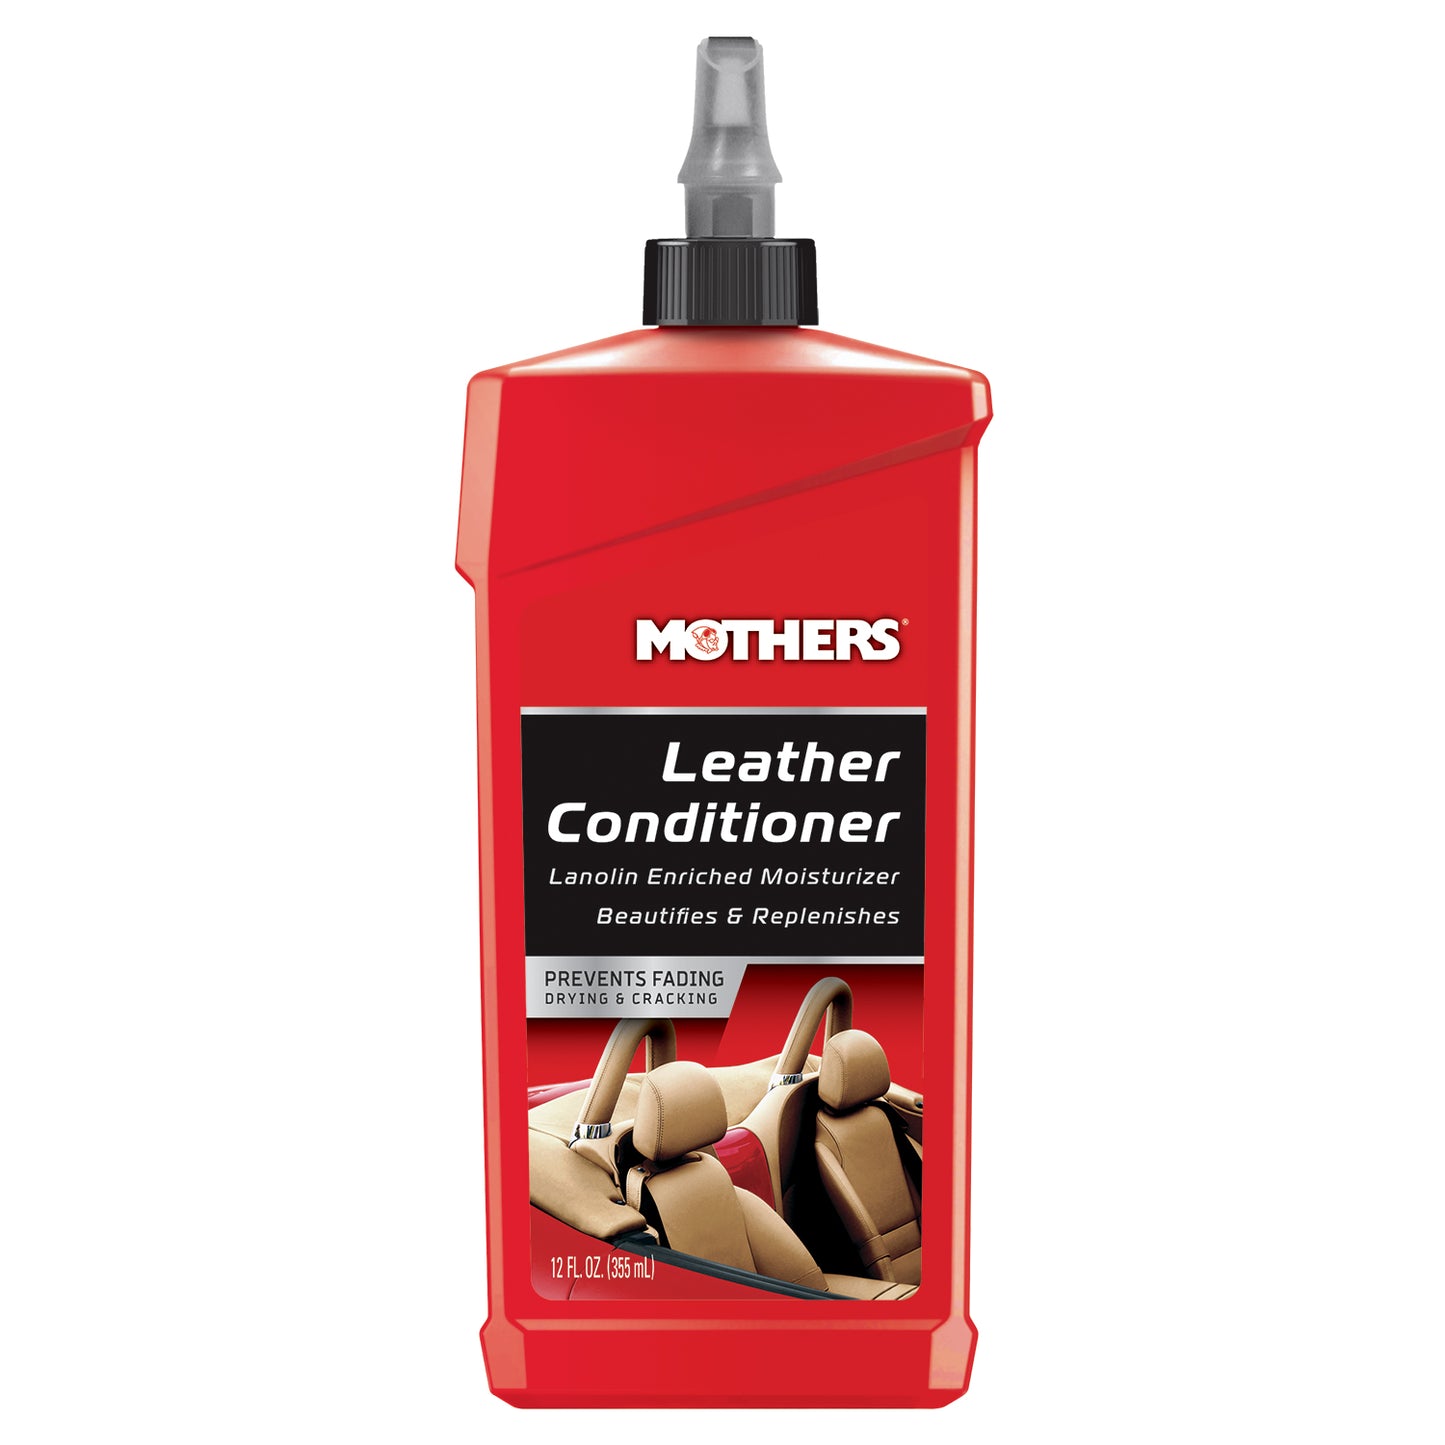 Mothers Leather Conditioner